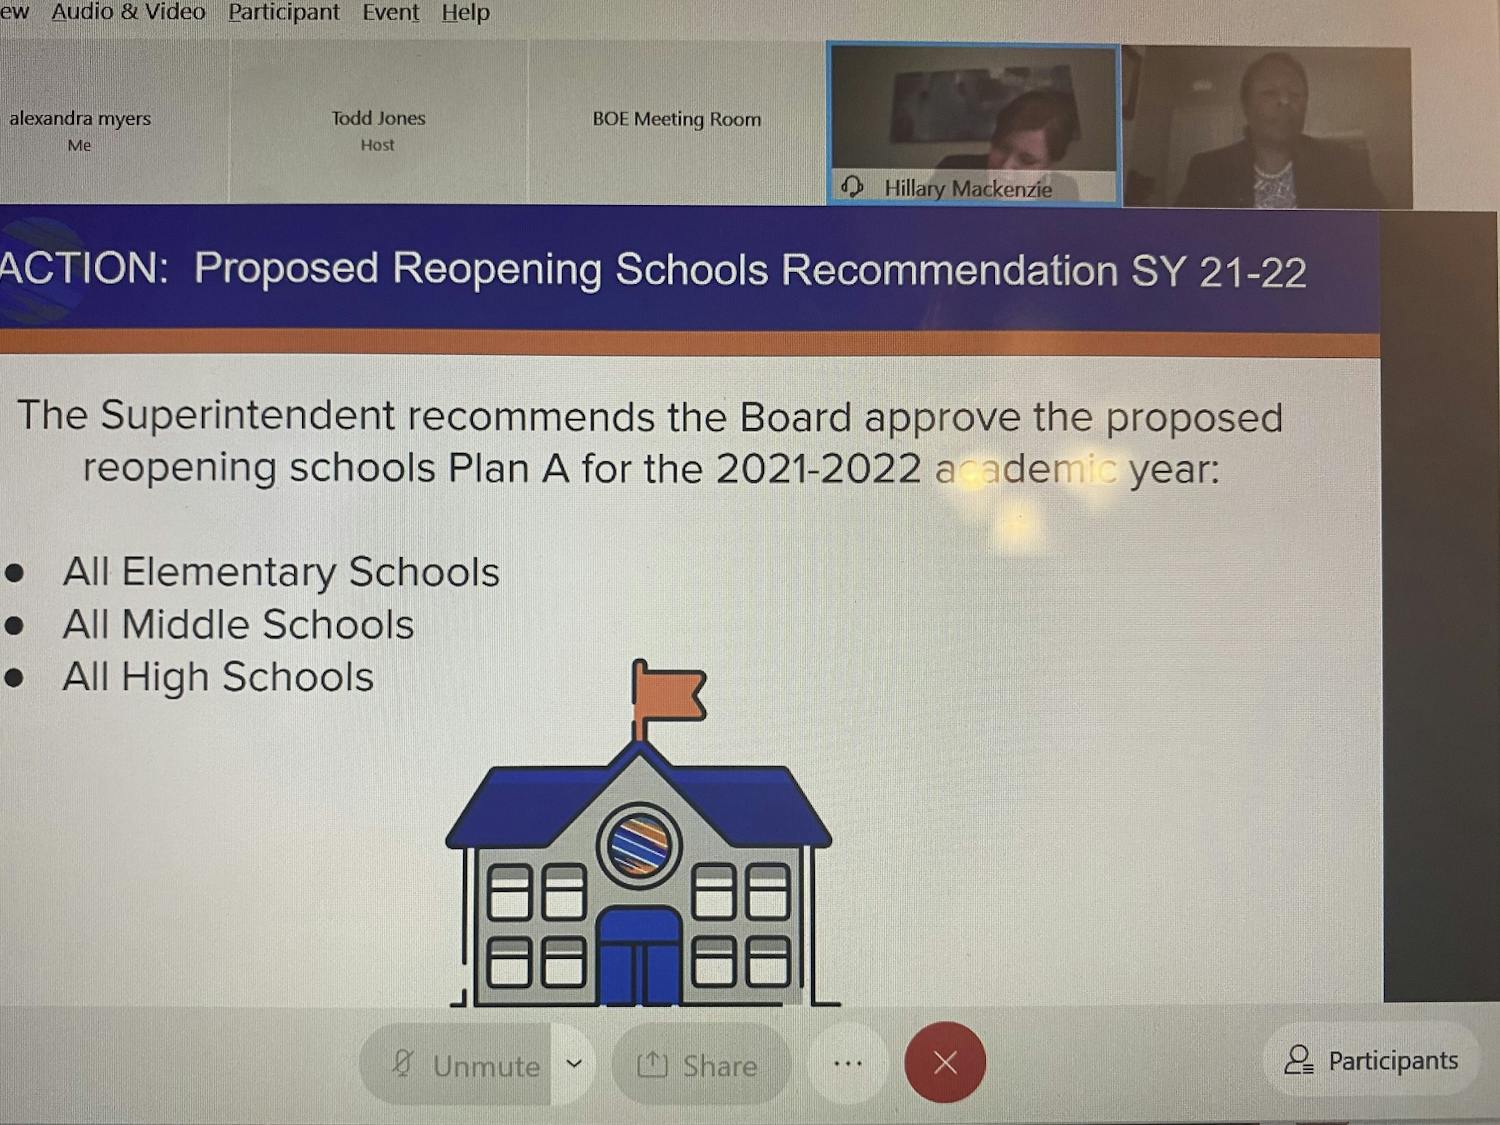 The OCS Board of Education voted on March 23, 2021 to allow all elementary schools to open fully in-person under Plan A. Middle and high schools will not fully open until next fall.